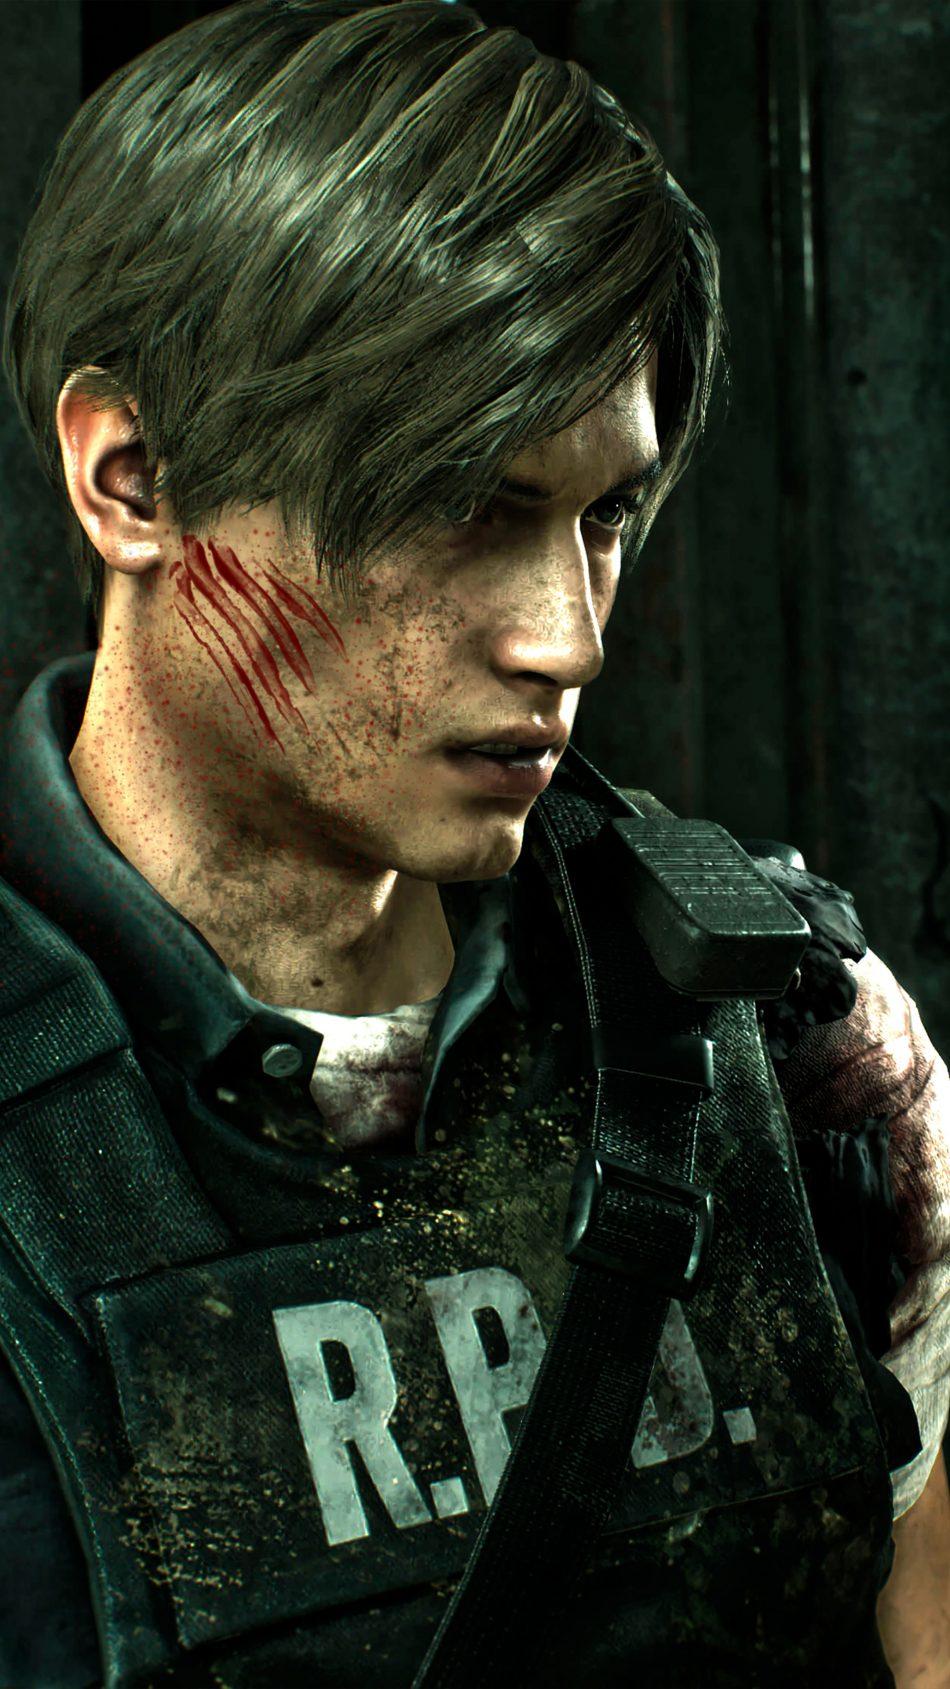 Download Leon S. Kennedy RPD Resident Evil 2 Free Pure 4K Ultra HD